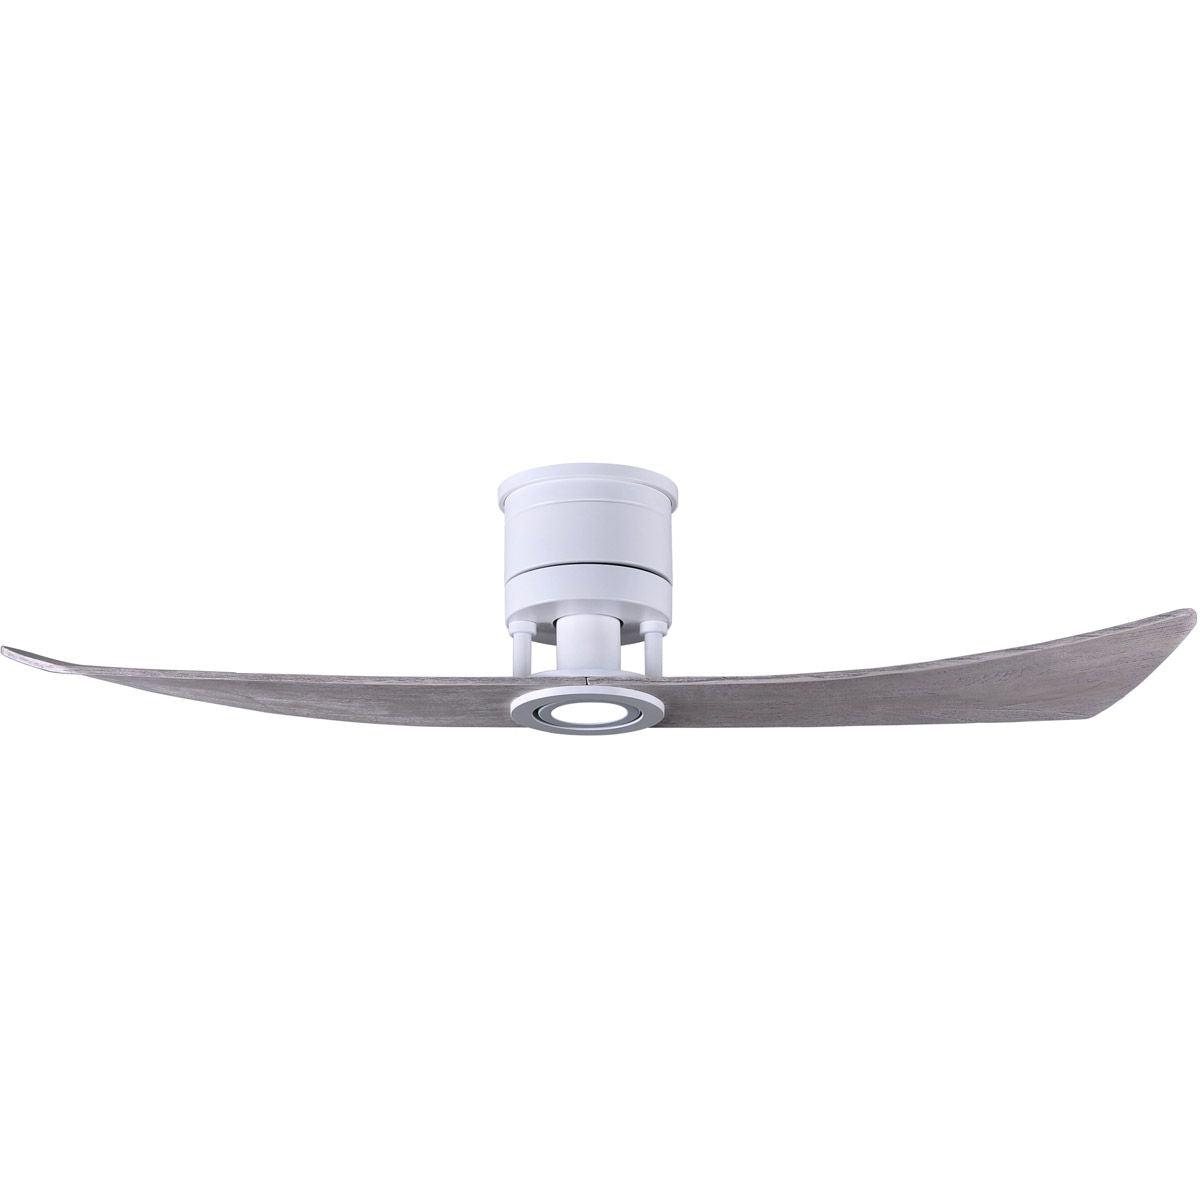 Lindsay 52 Inch Modern Outdoor Ceiling Fan With Light, Wall And Remote Control Included